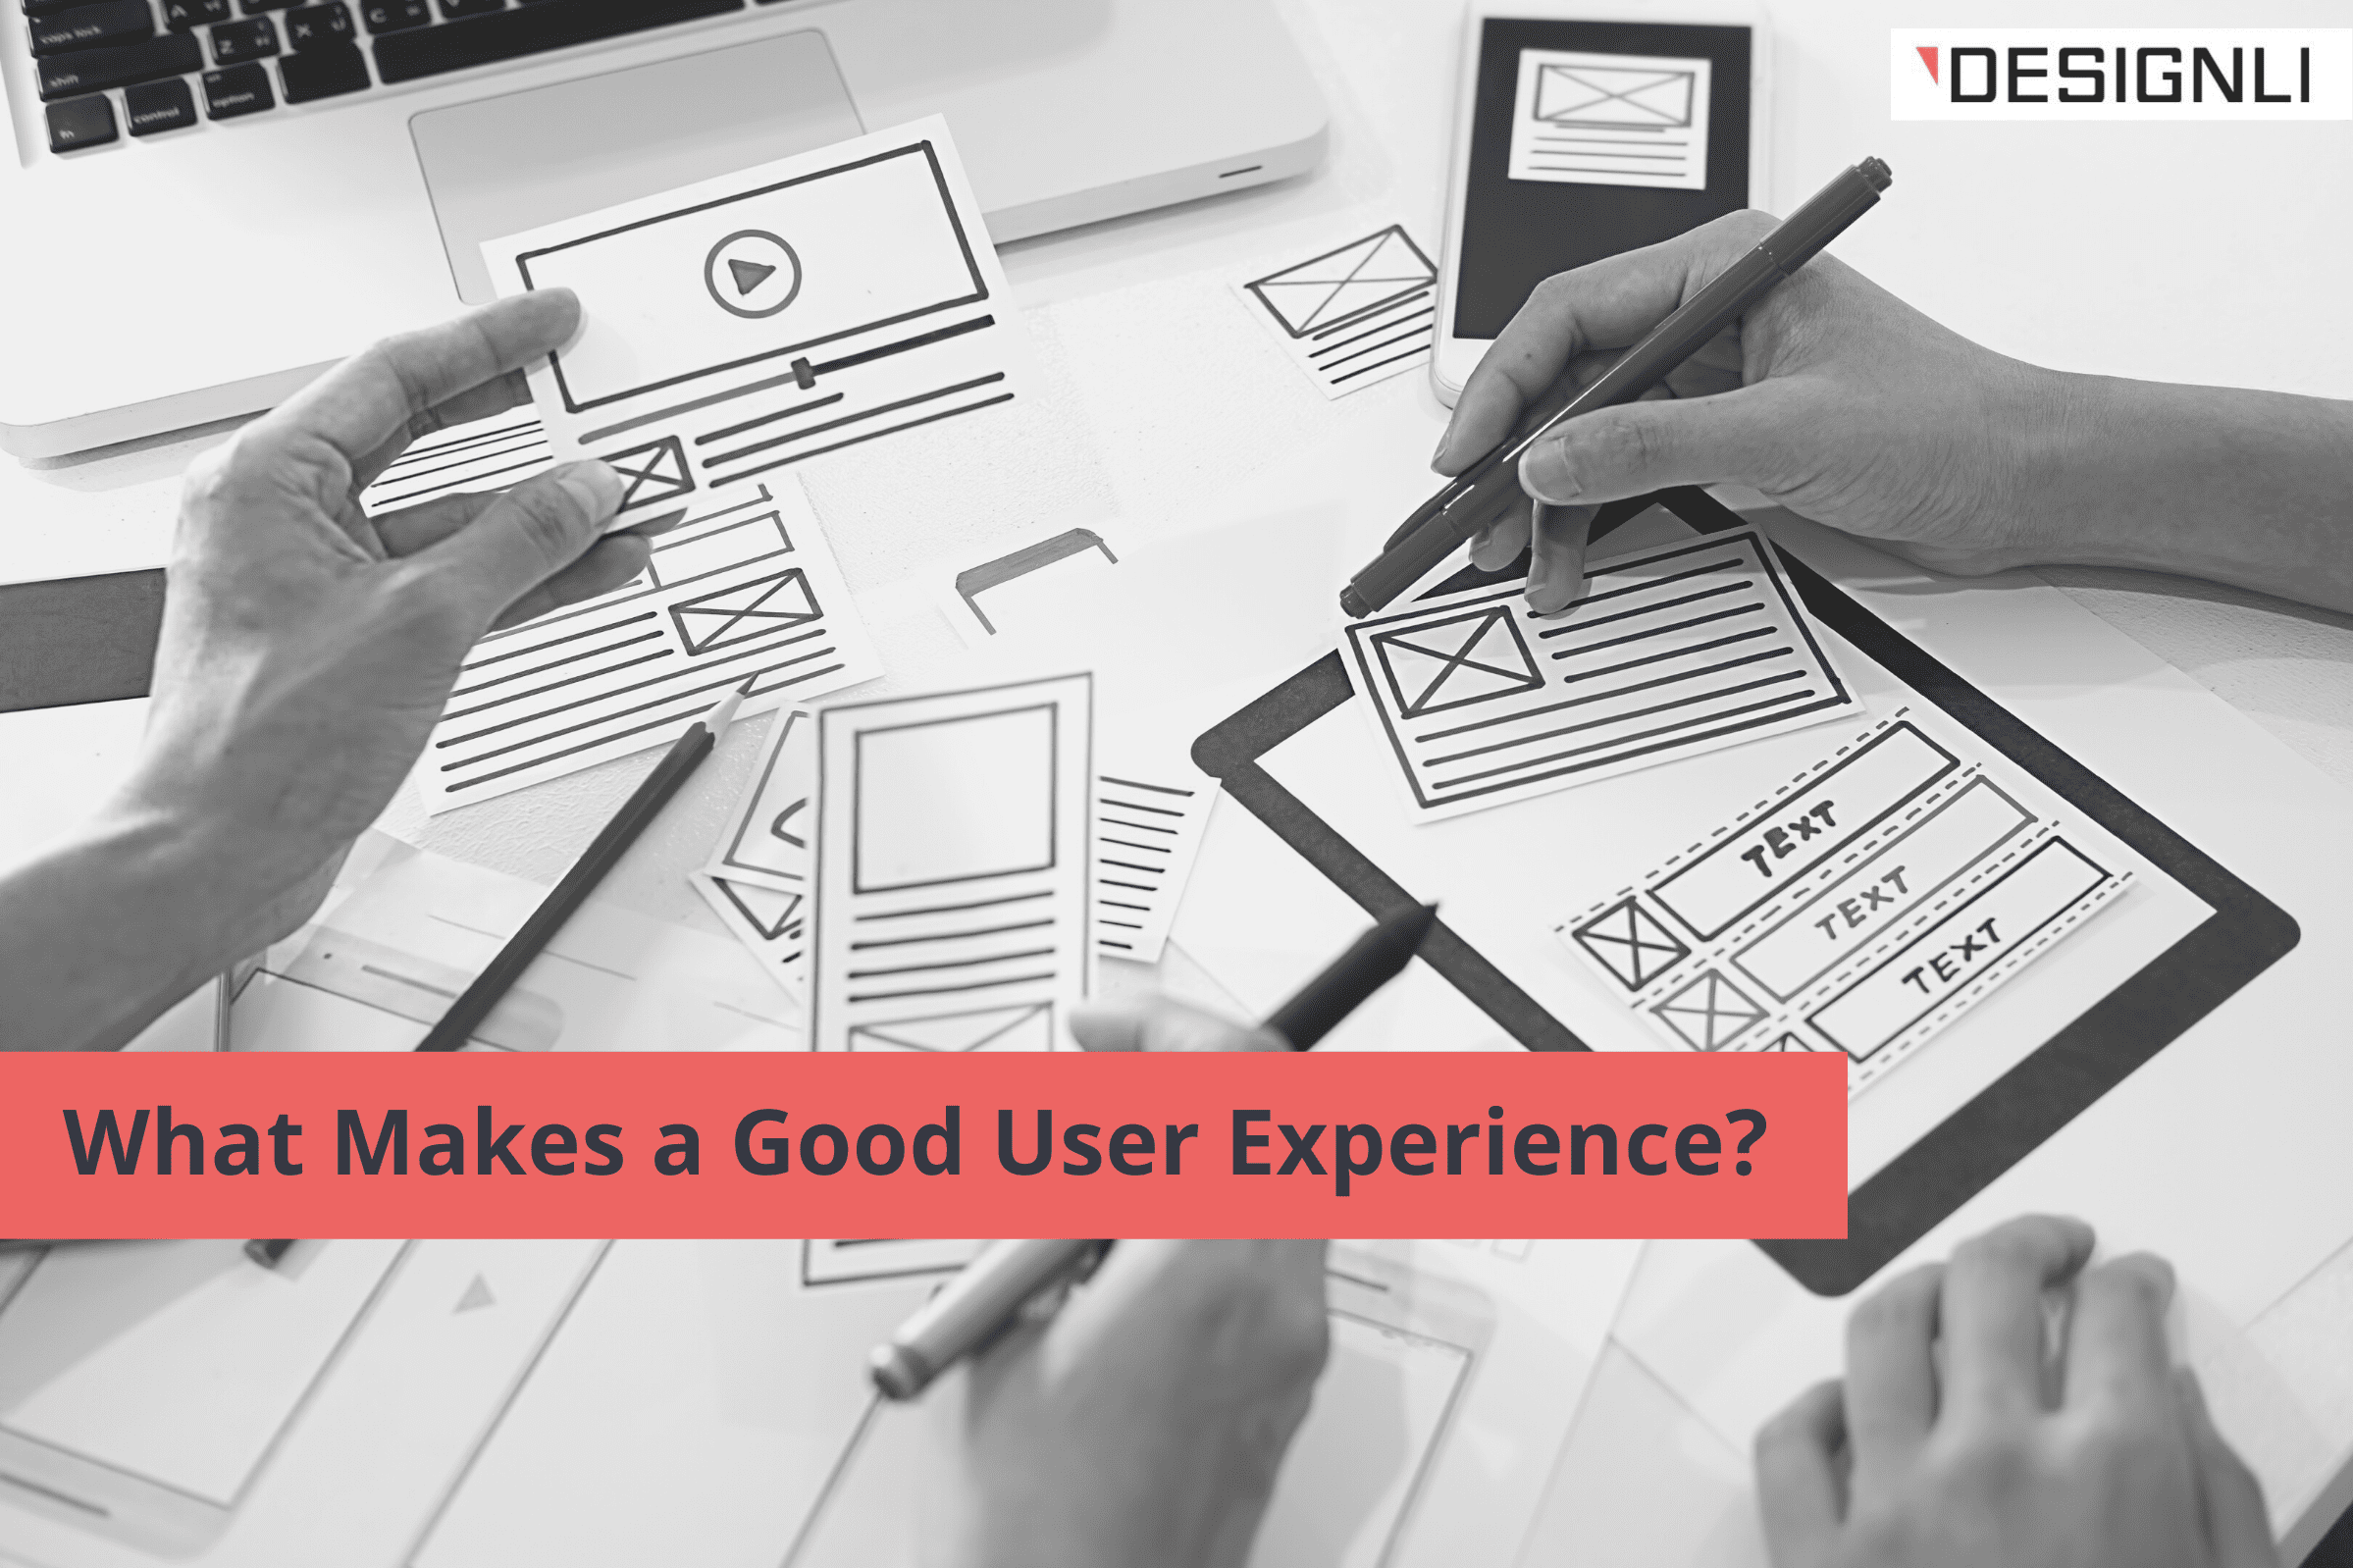 What Makes a Good User Experience?